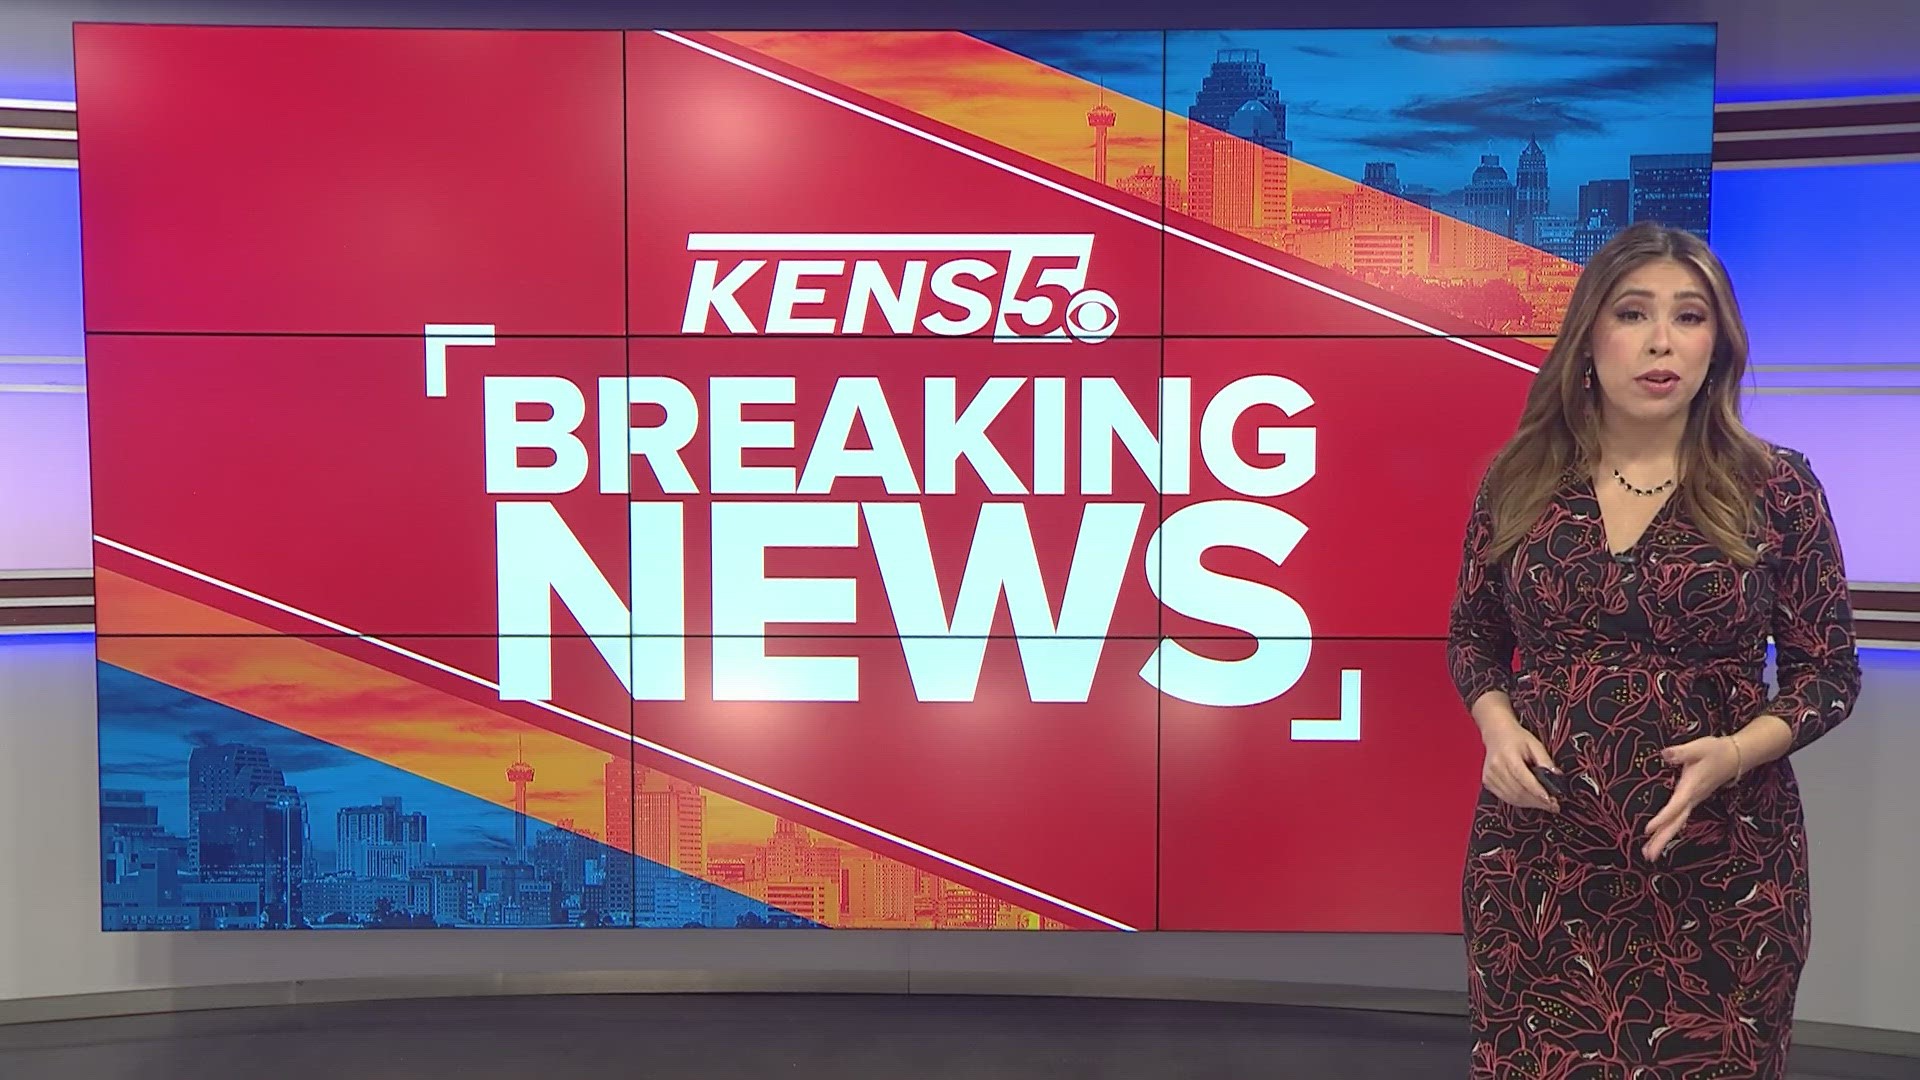 KENS 5 is working to find out more.